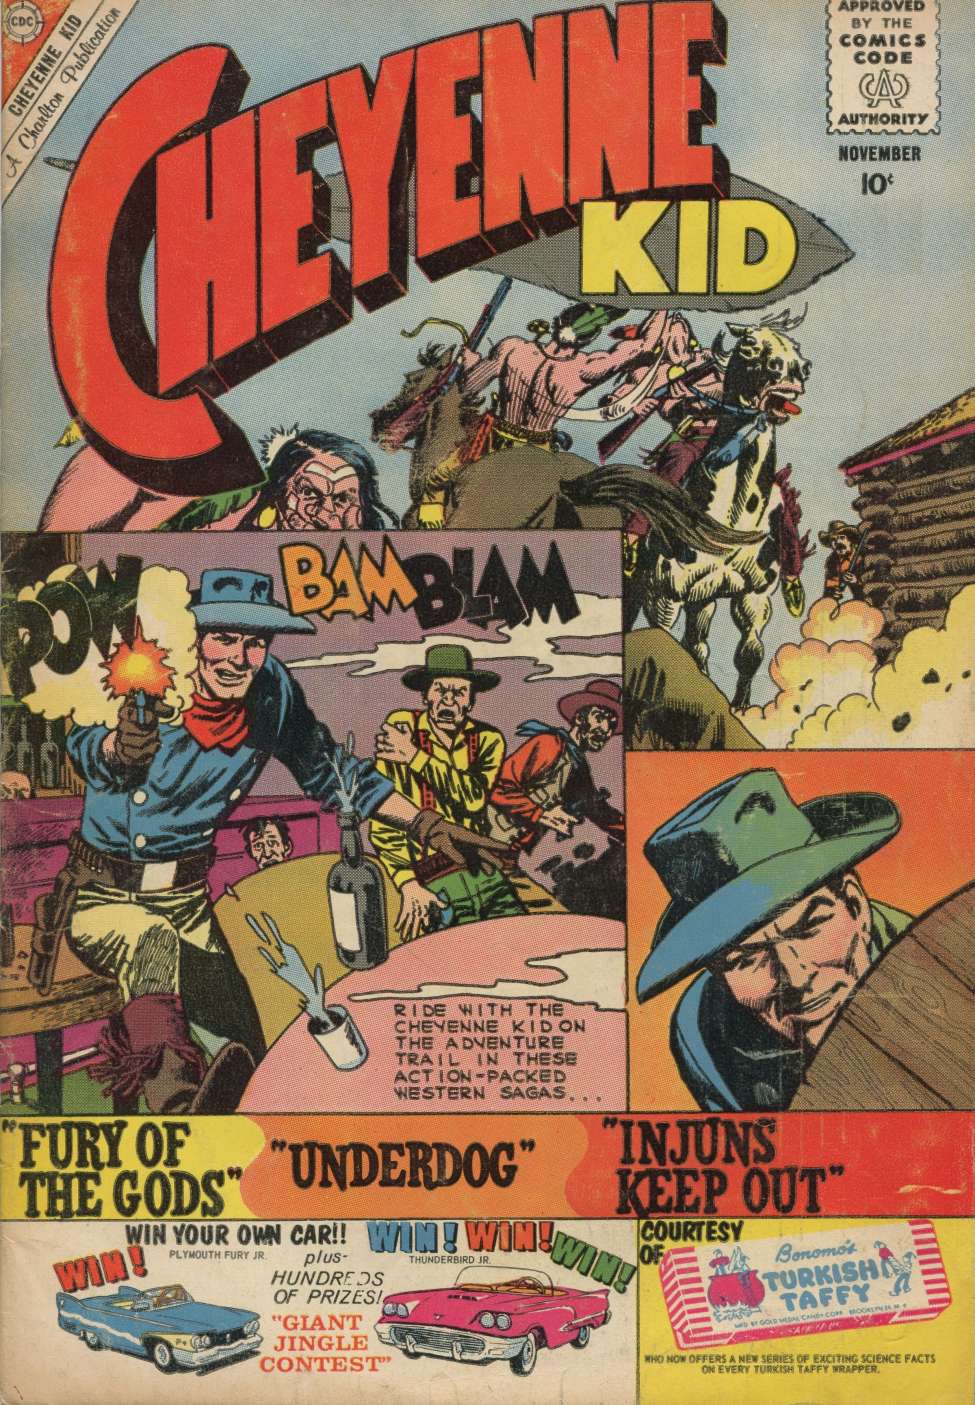 Book Cover For Cheyenne Kid 25